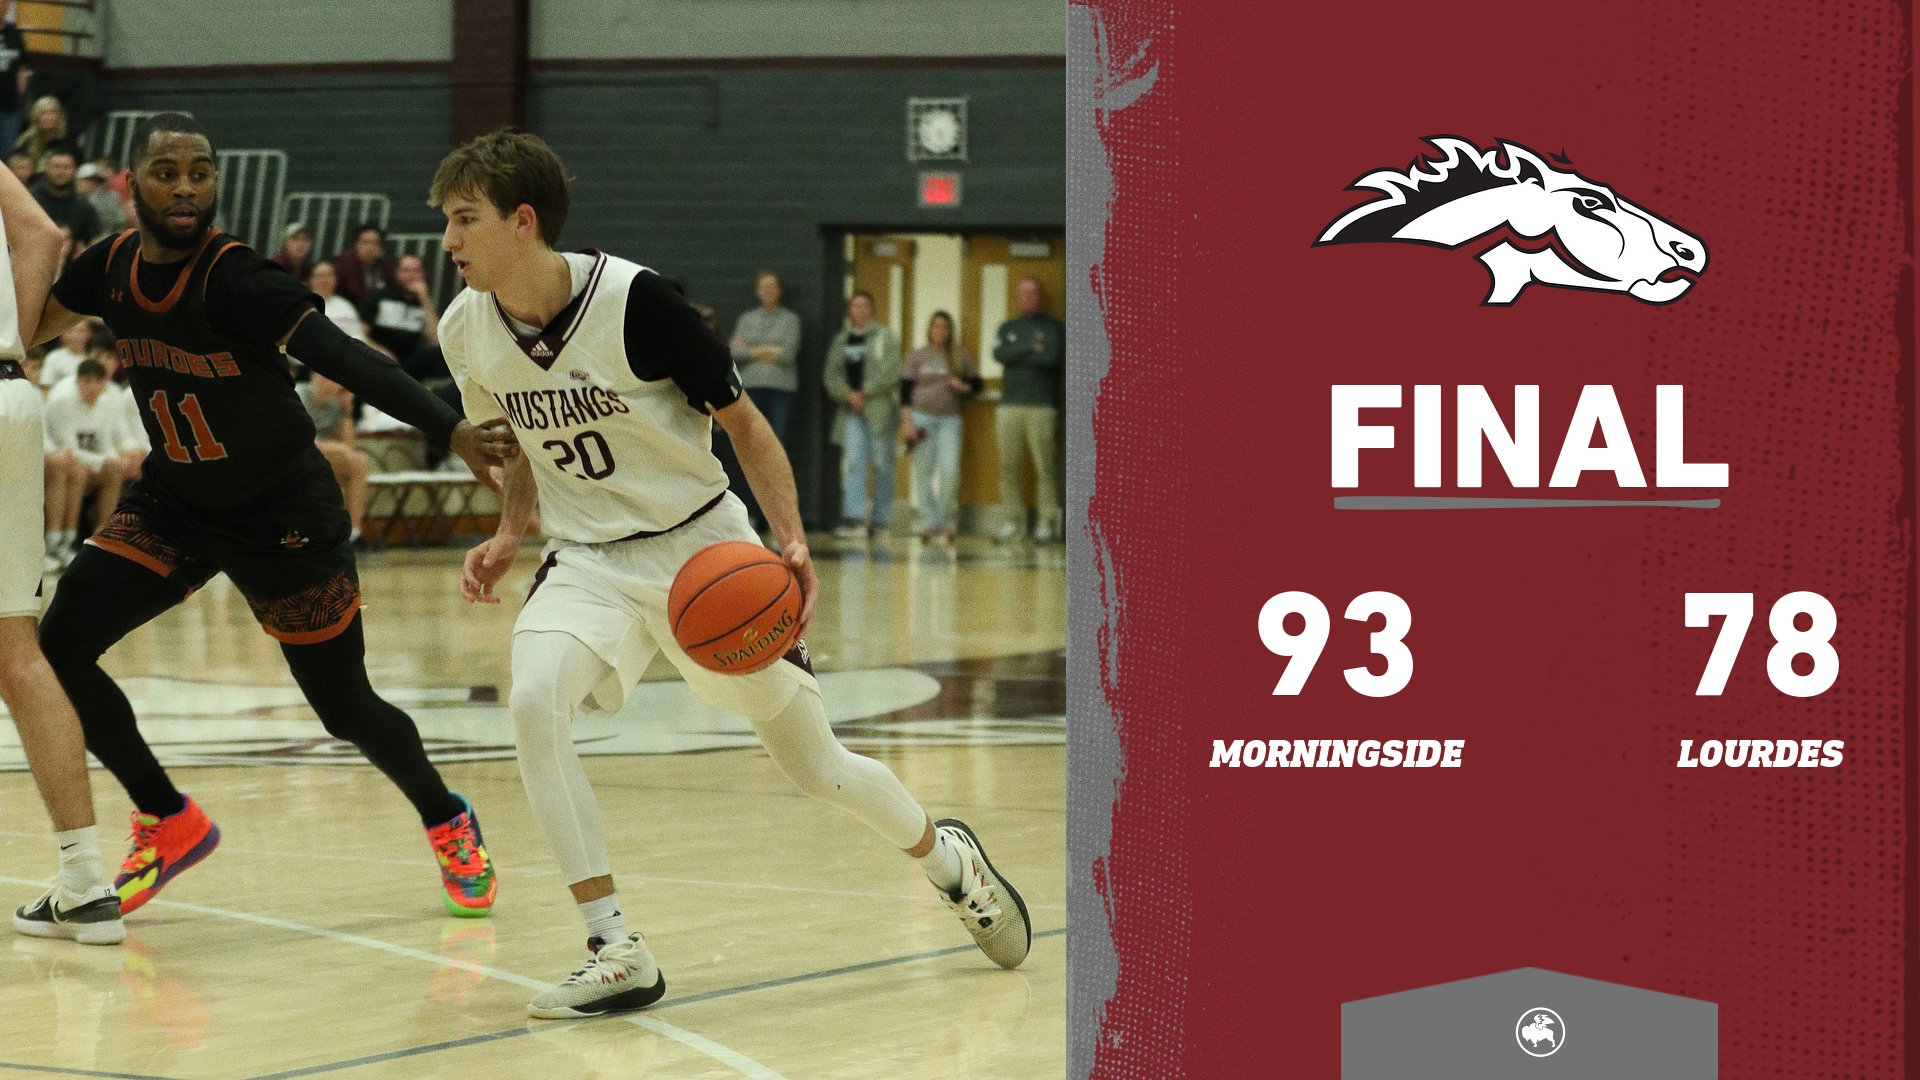 Mustangs cruise to 93-78 win over Lourdes